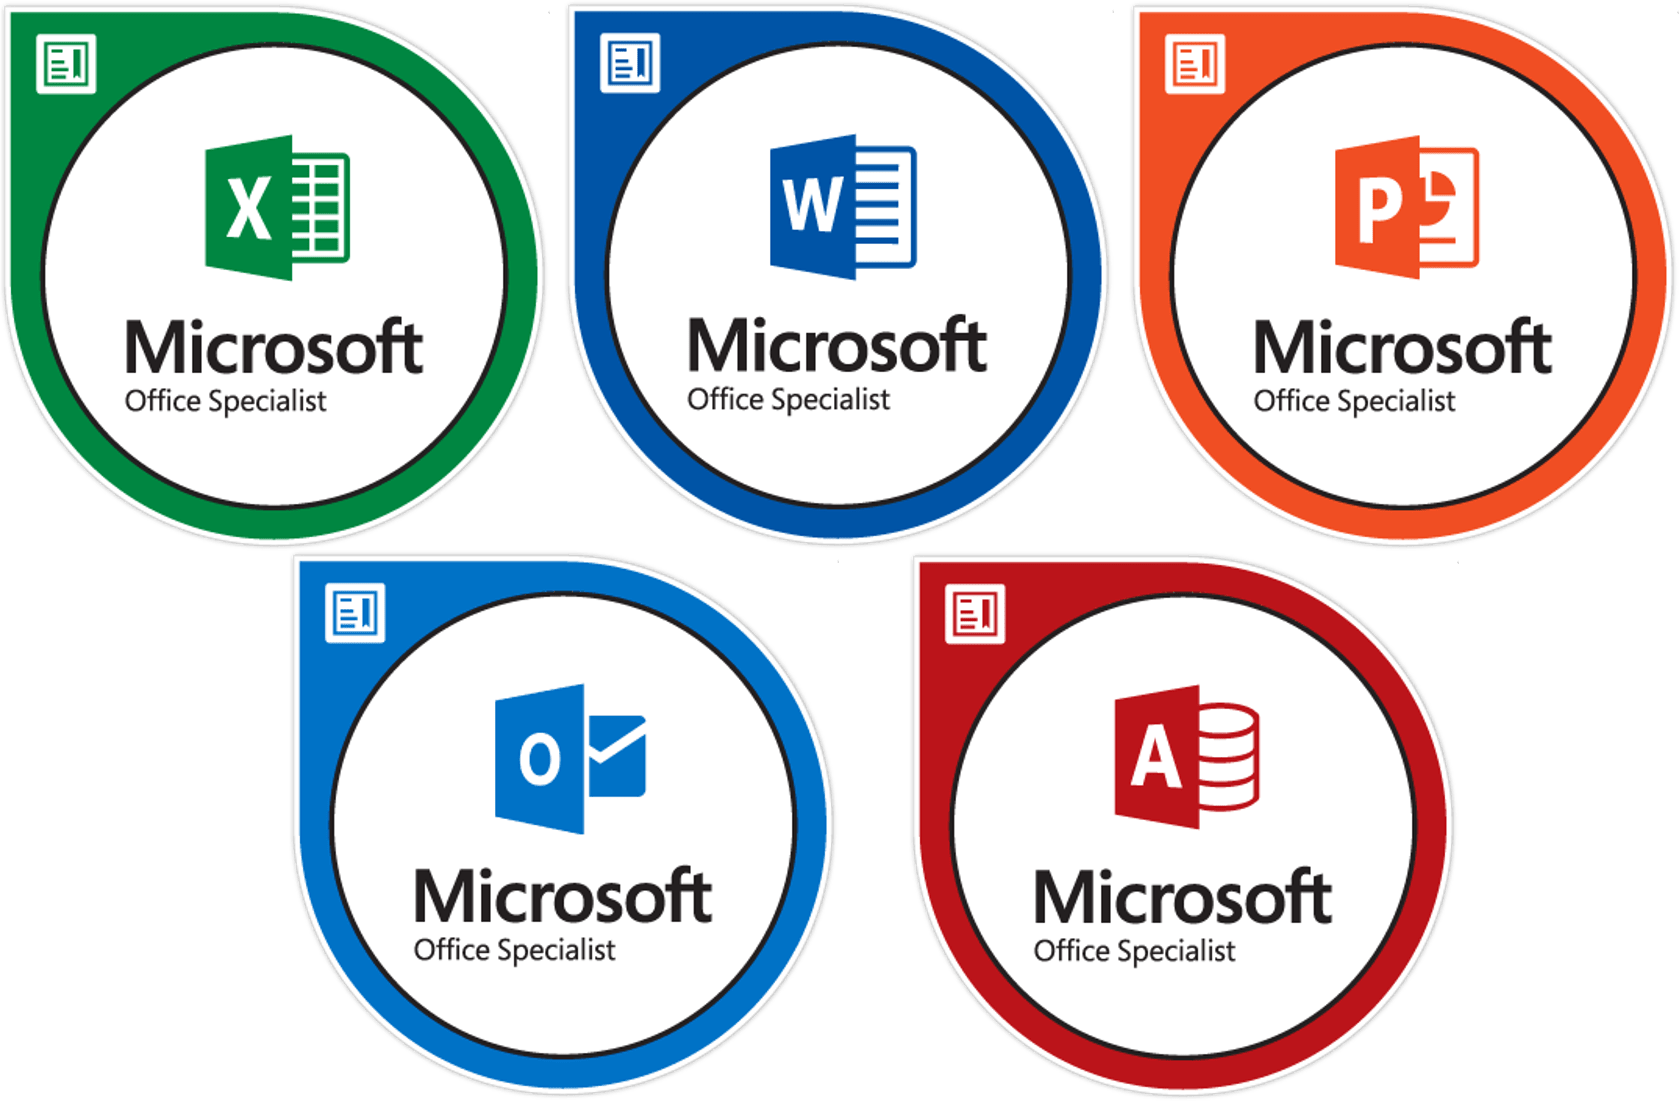 MO-200 – Microsoft Excel (Excel and Excel 2019)